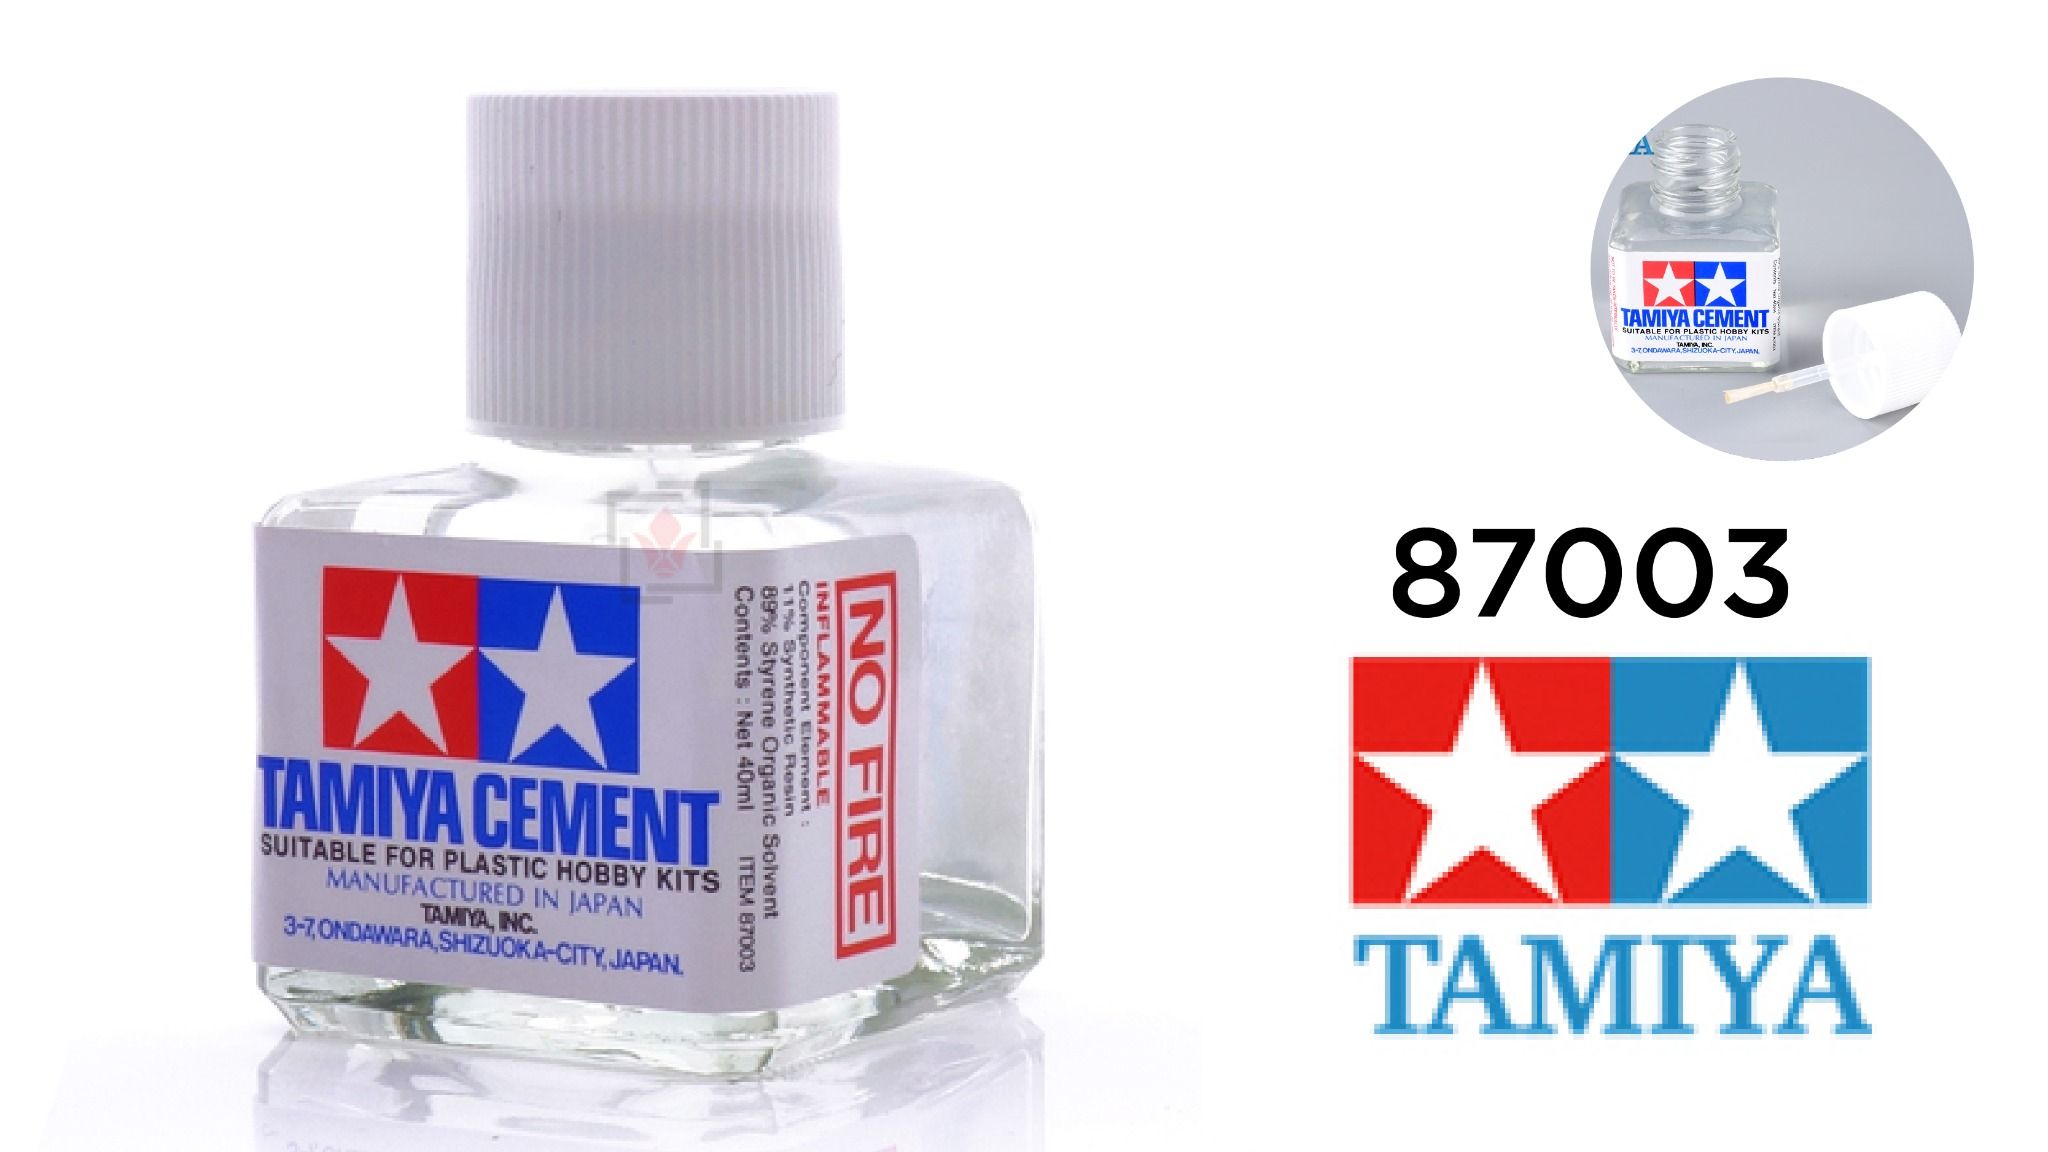  Dung dịch keo Tamiya cement Plastic 40ml 87003 